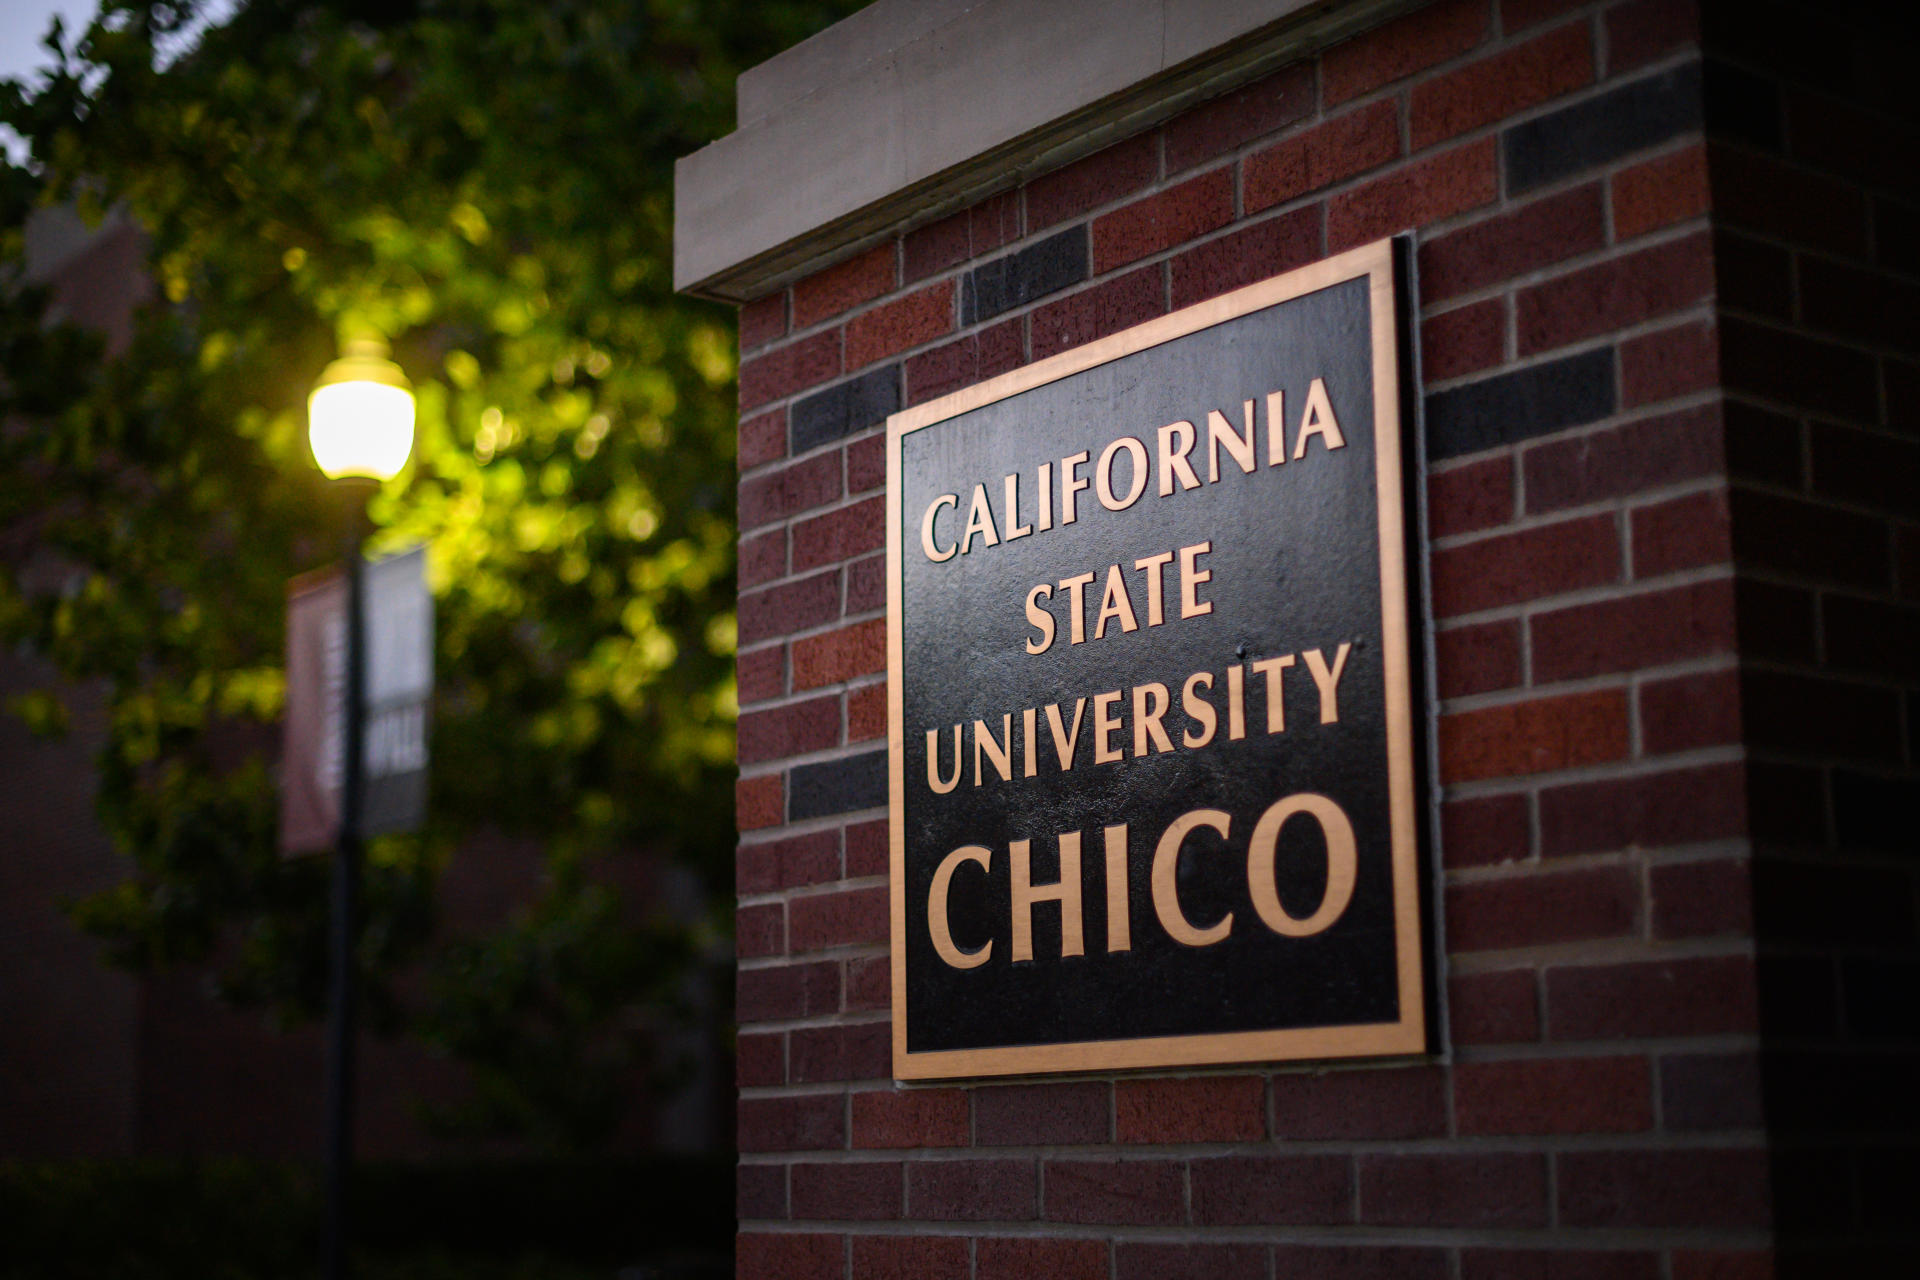 A plaque reading California State University, Chico is displayed on brick during twilight.